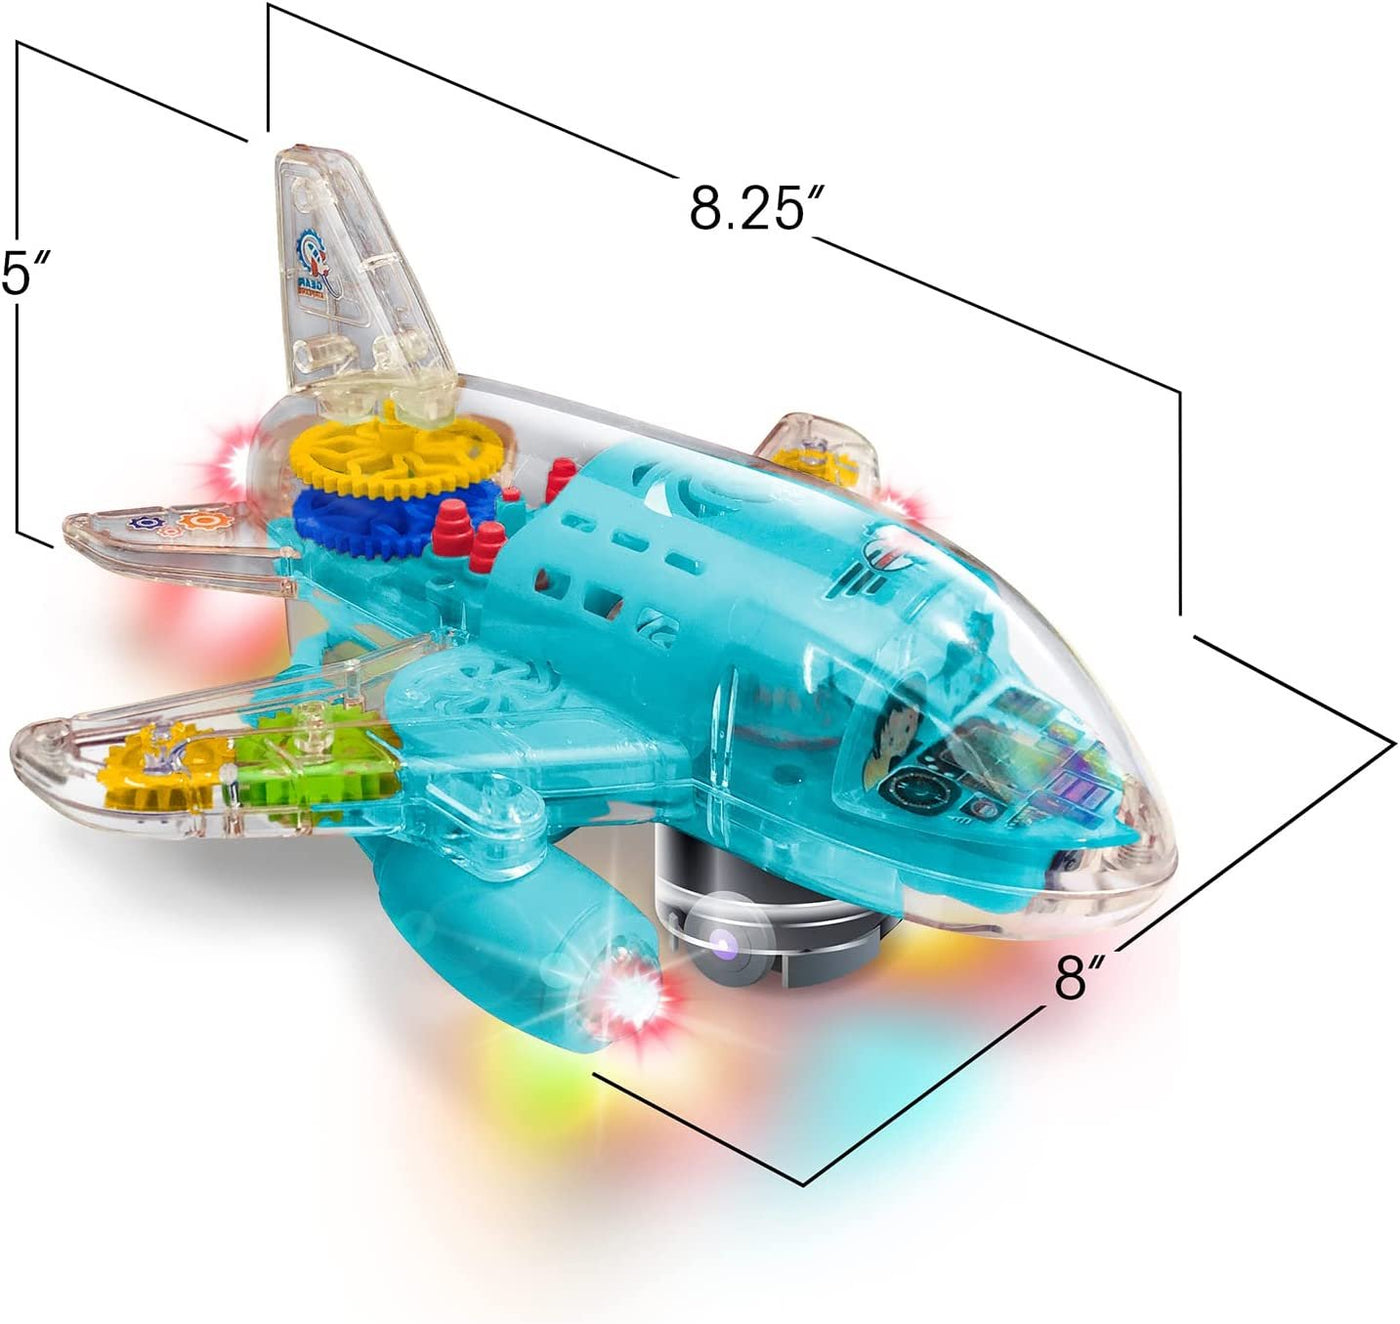 Light Up Transparent Airplane Toy for Kids, 1PC, Bump and Go Kids Airplane with Colorful Moving Gears, Music, and LED Effects, Toy Airplane For Toddlers 1-3, Fun Toddler Boy Toys Ages 3+